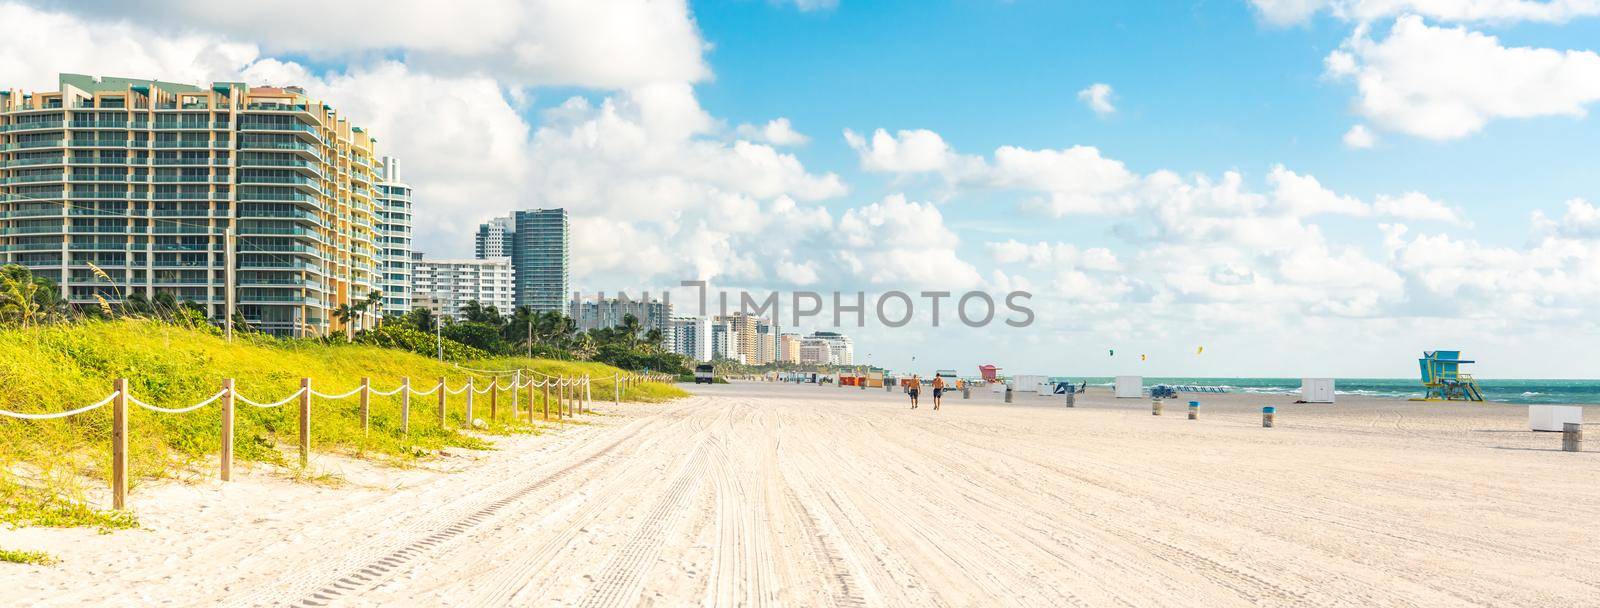 Wide South Beach in Miami Florida with grass and buildings